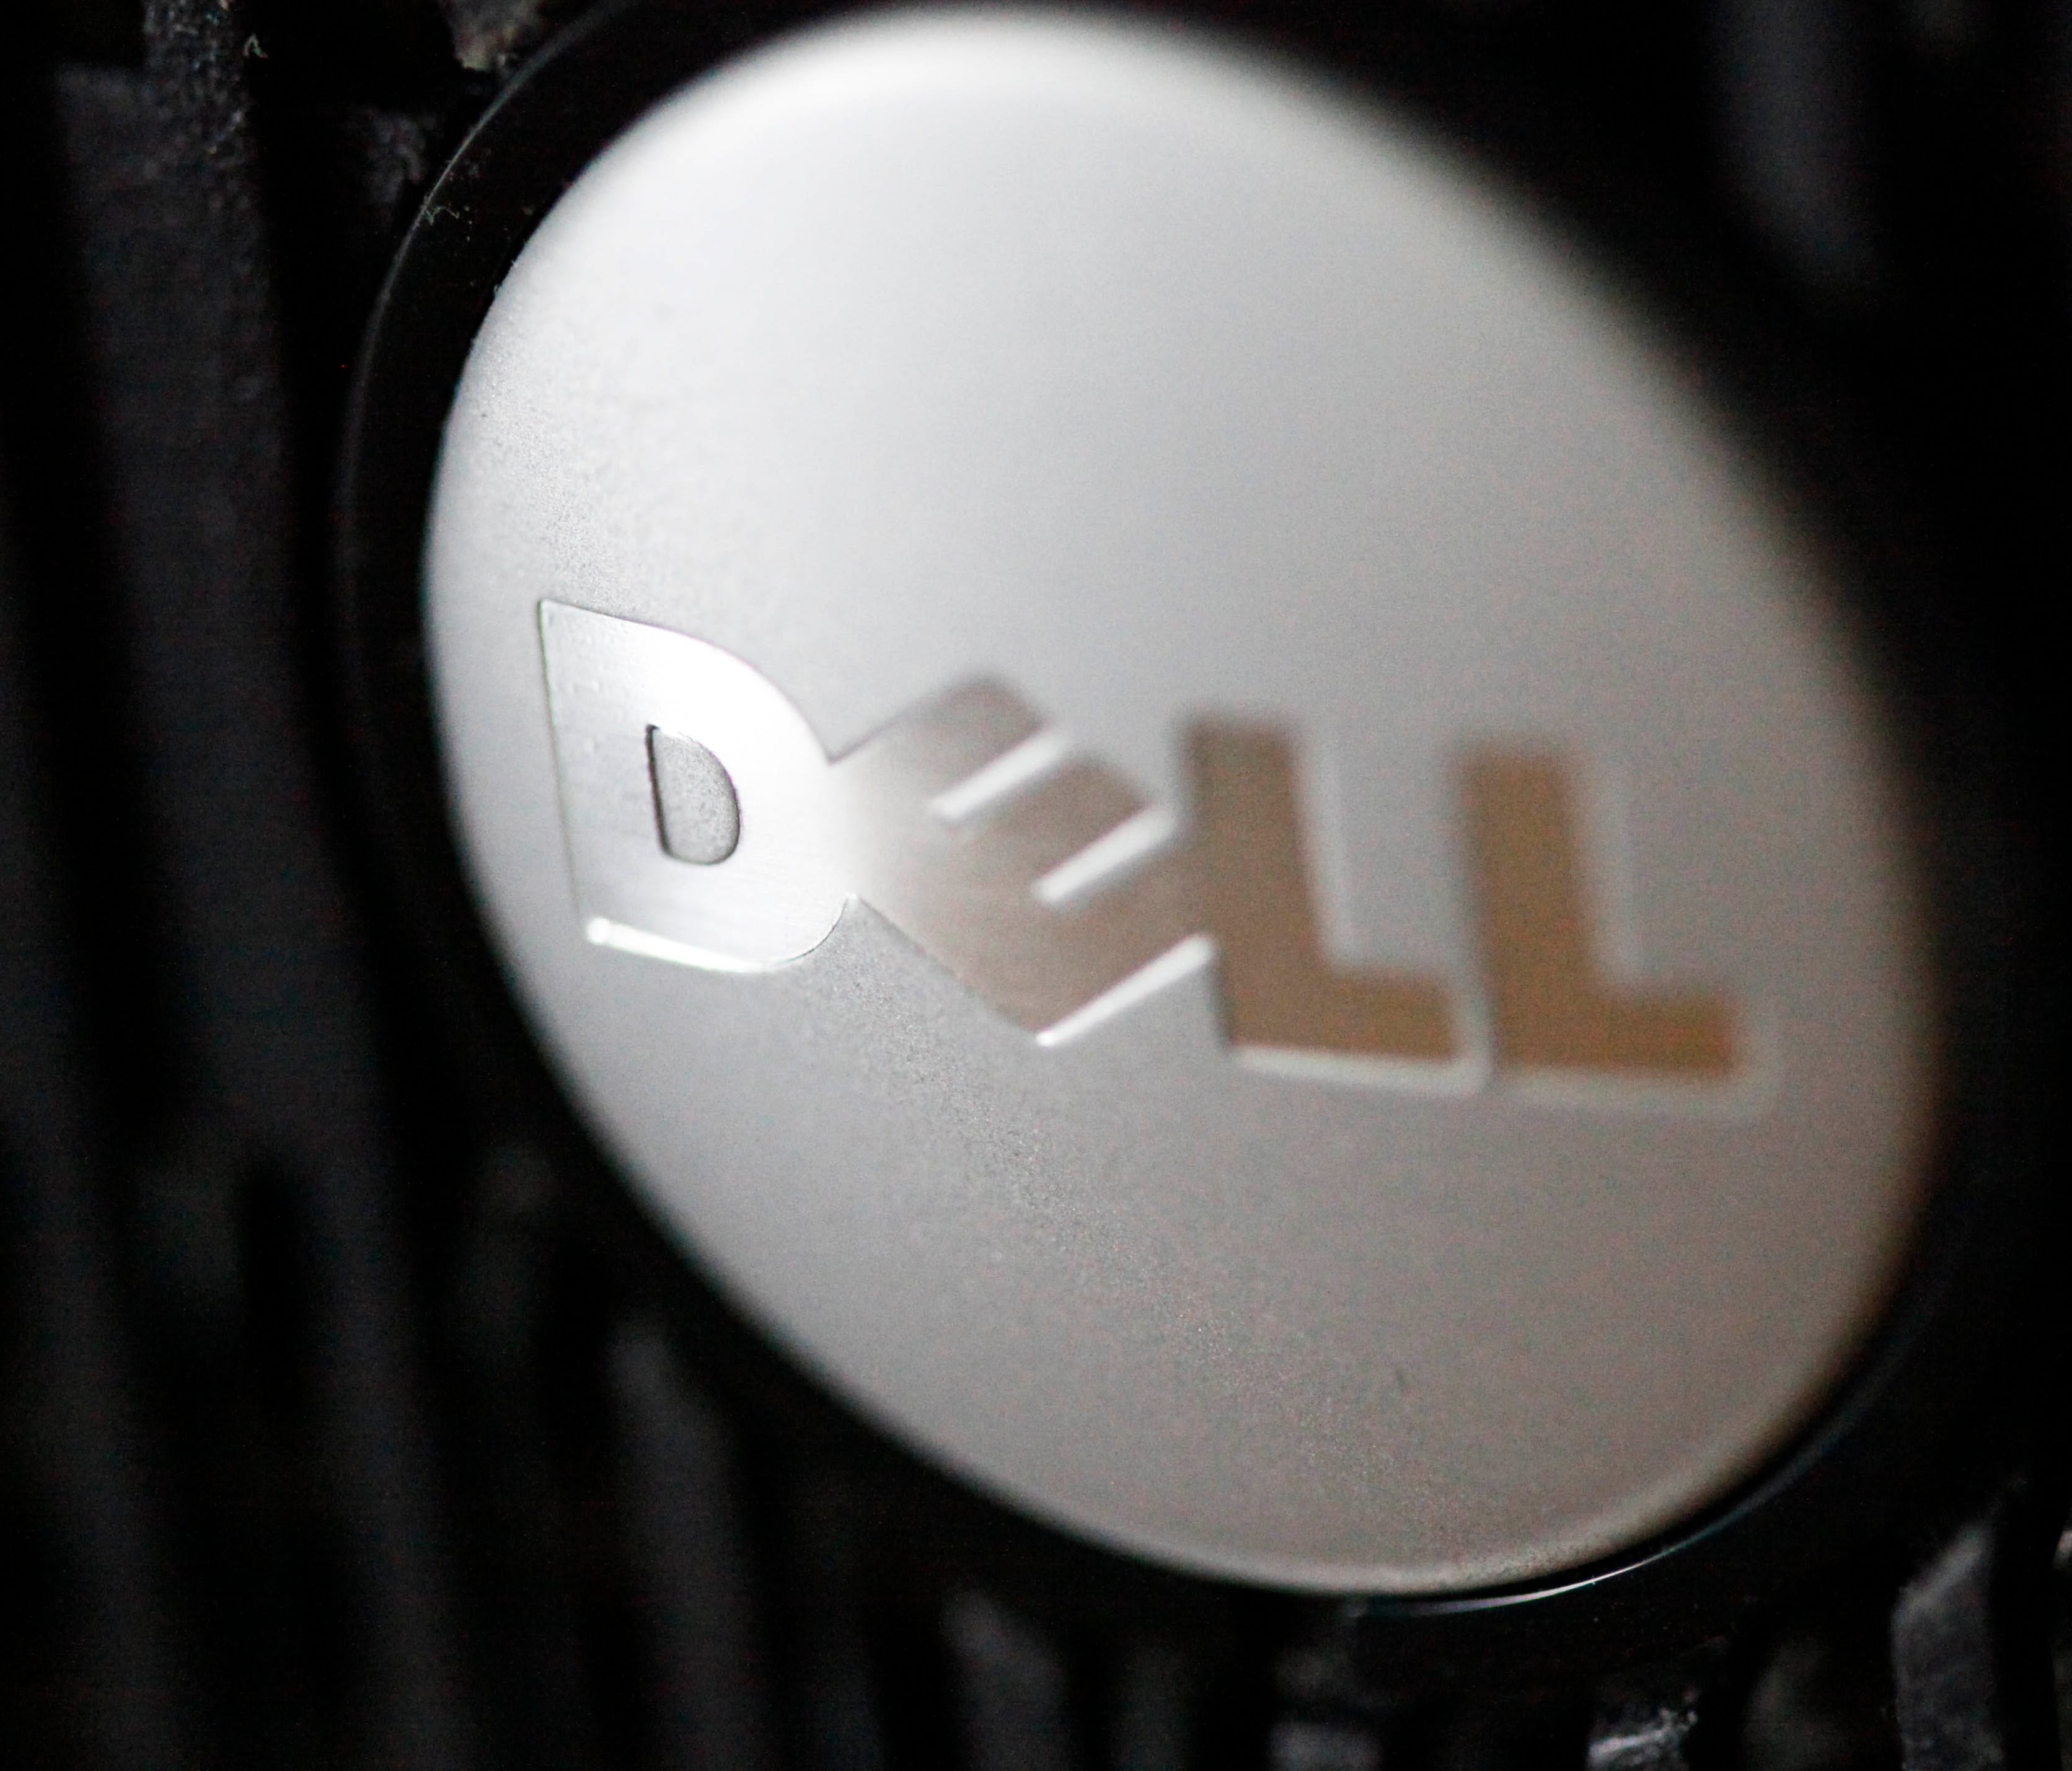 The logo on a Dell computer is displayed, in Philadelphia.